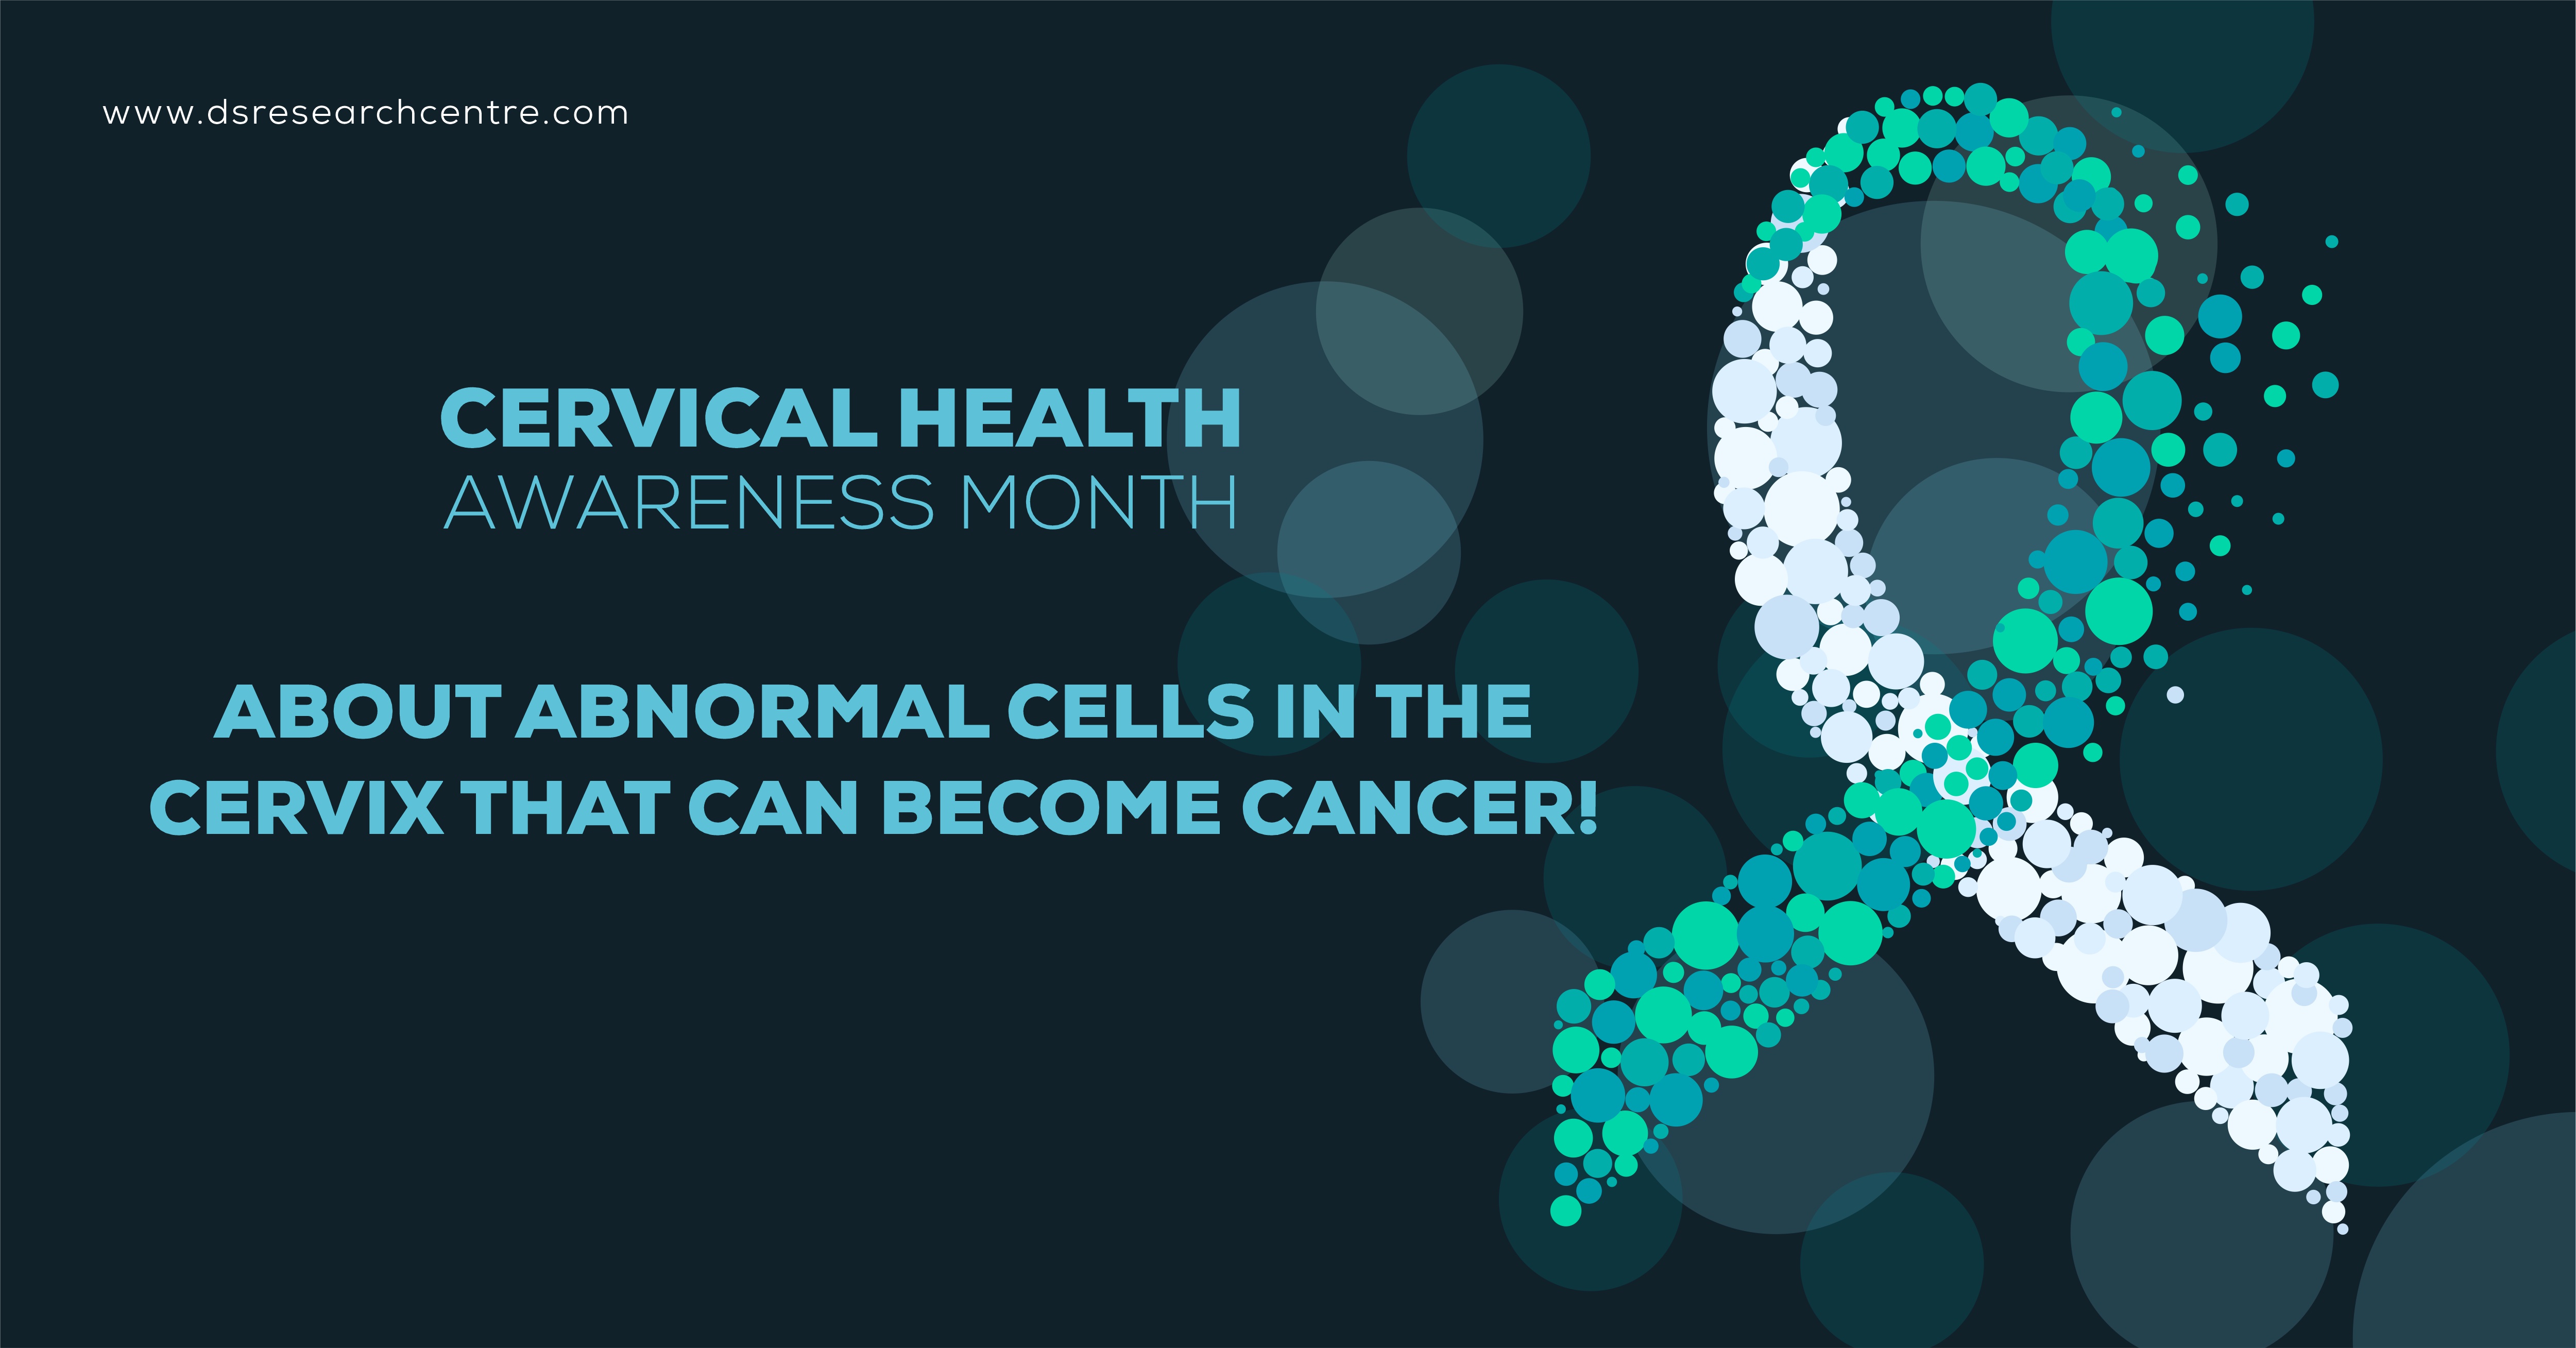 Cervical Health Awareness Month-About abnormal cells in the cervix that can become cancer